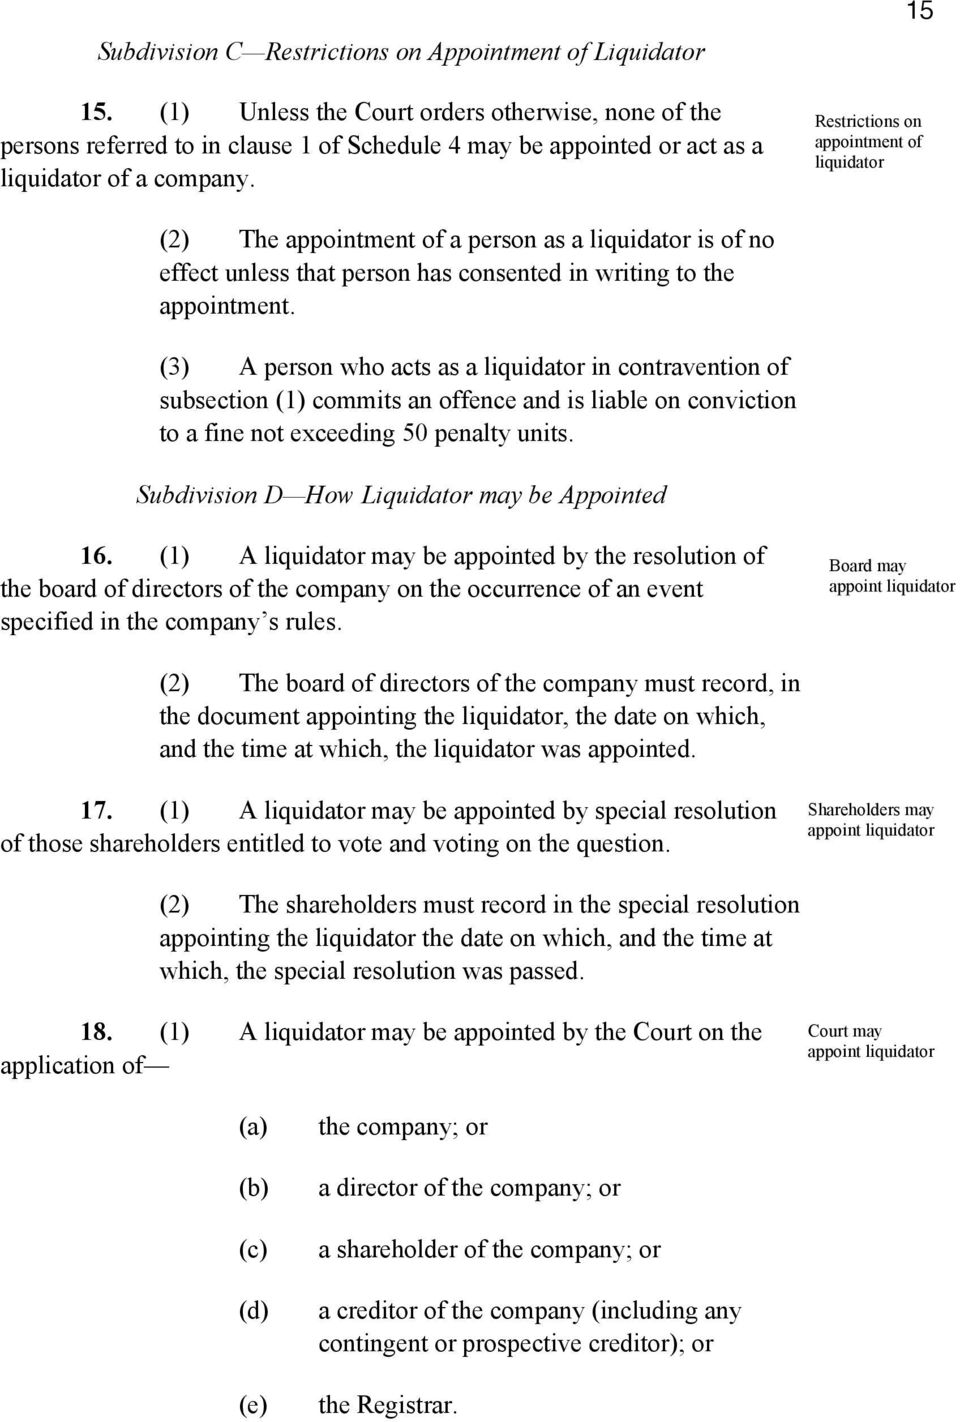 15 Restrictions on appointment of liquidator (2) The appointment of a person as a liquidator is of no effect unless that person has consented in writing to the appointment.